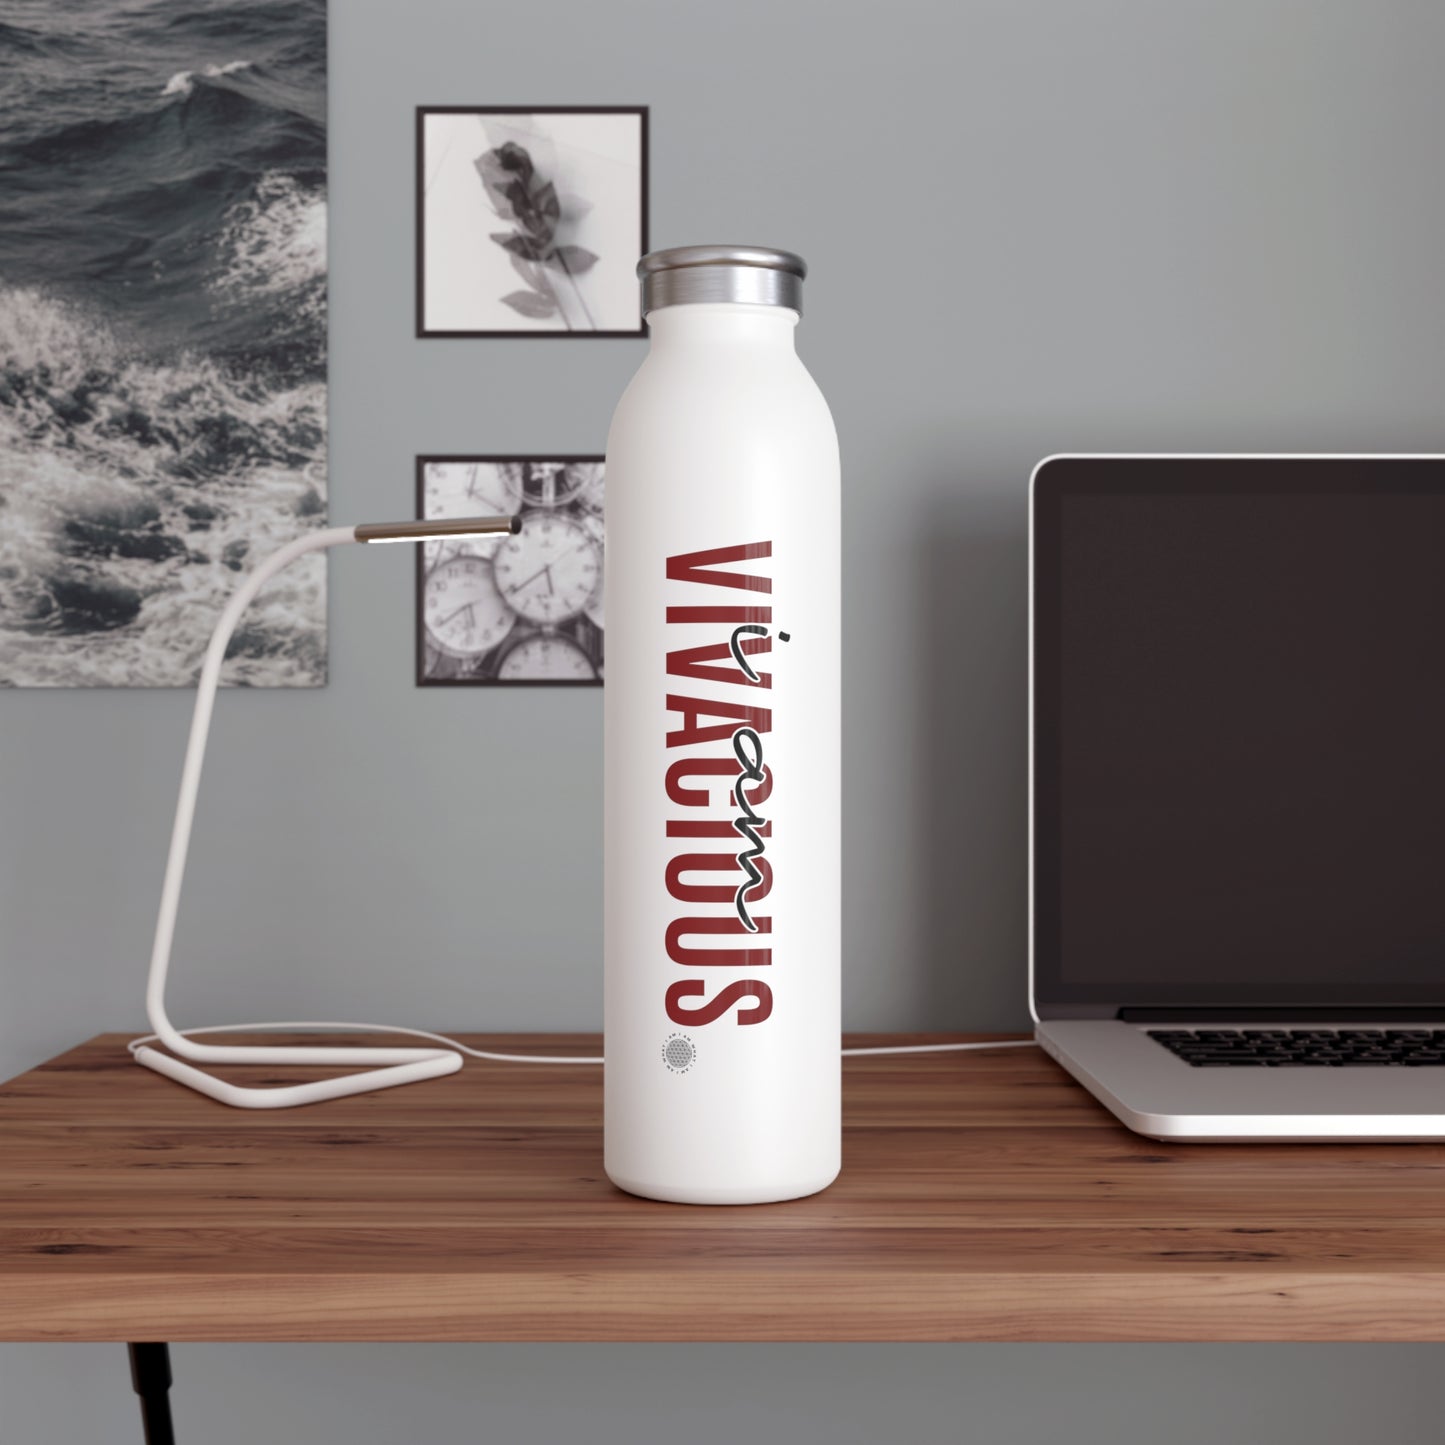 Our I Am Vivacious affirmation water bottle is one of our positive affirmations for mental health. Positive thinking keeps our mindset happy and healthy. This personalized water bottle was designed to become a creator’s favorite canvas of expression.